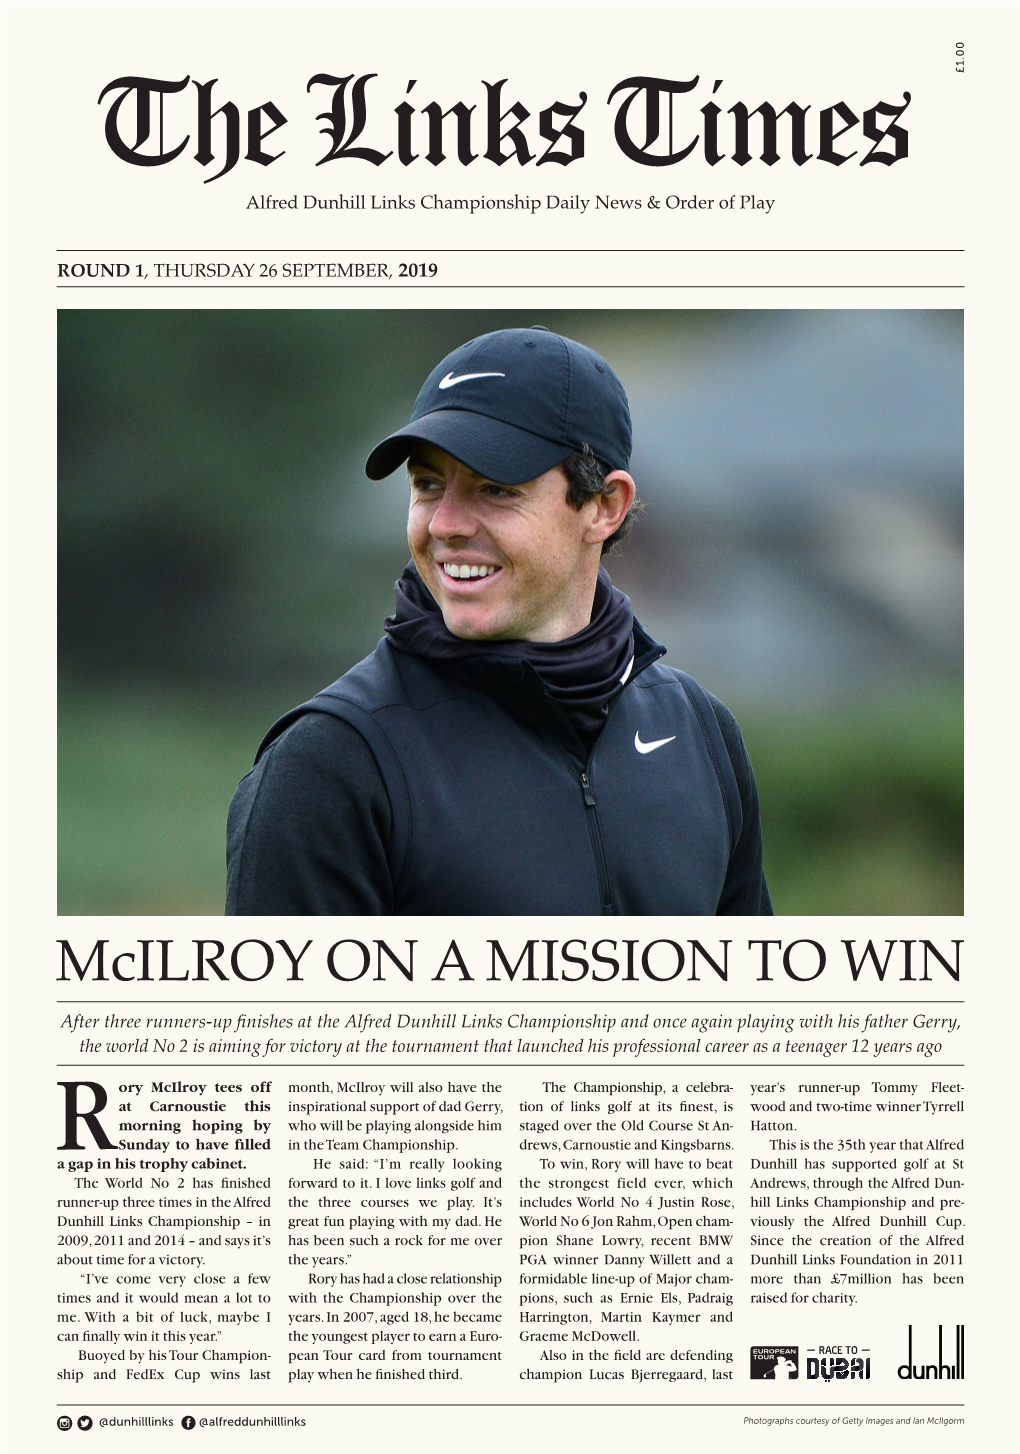 Mcilroy on a MISSION TO